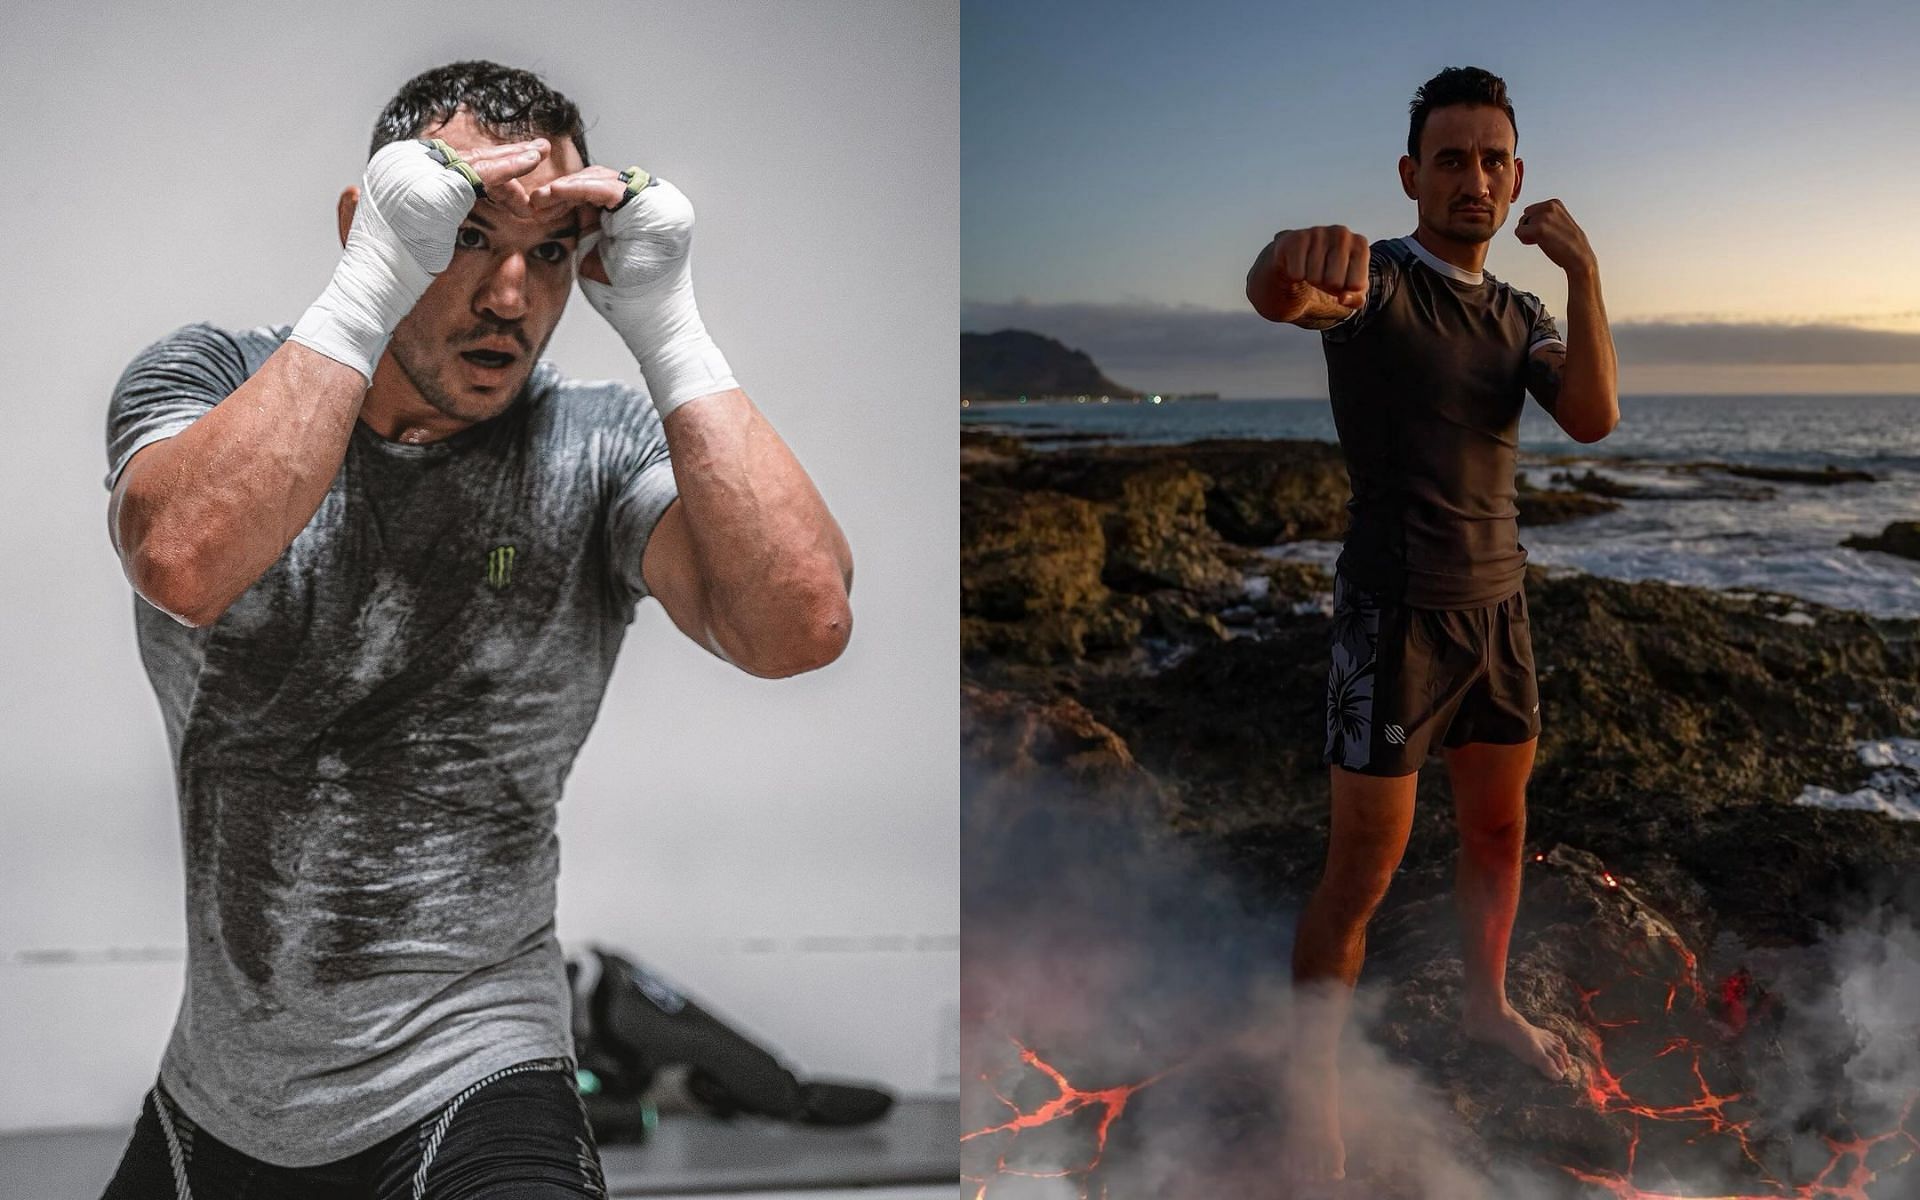 Michael Chandler (left) wants to fight Max Holloway (right) [Images courtesy: @mikechandlermma and @blessedmma on Instagram]